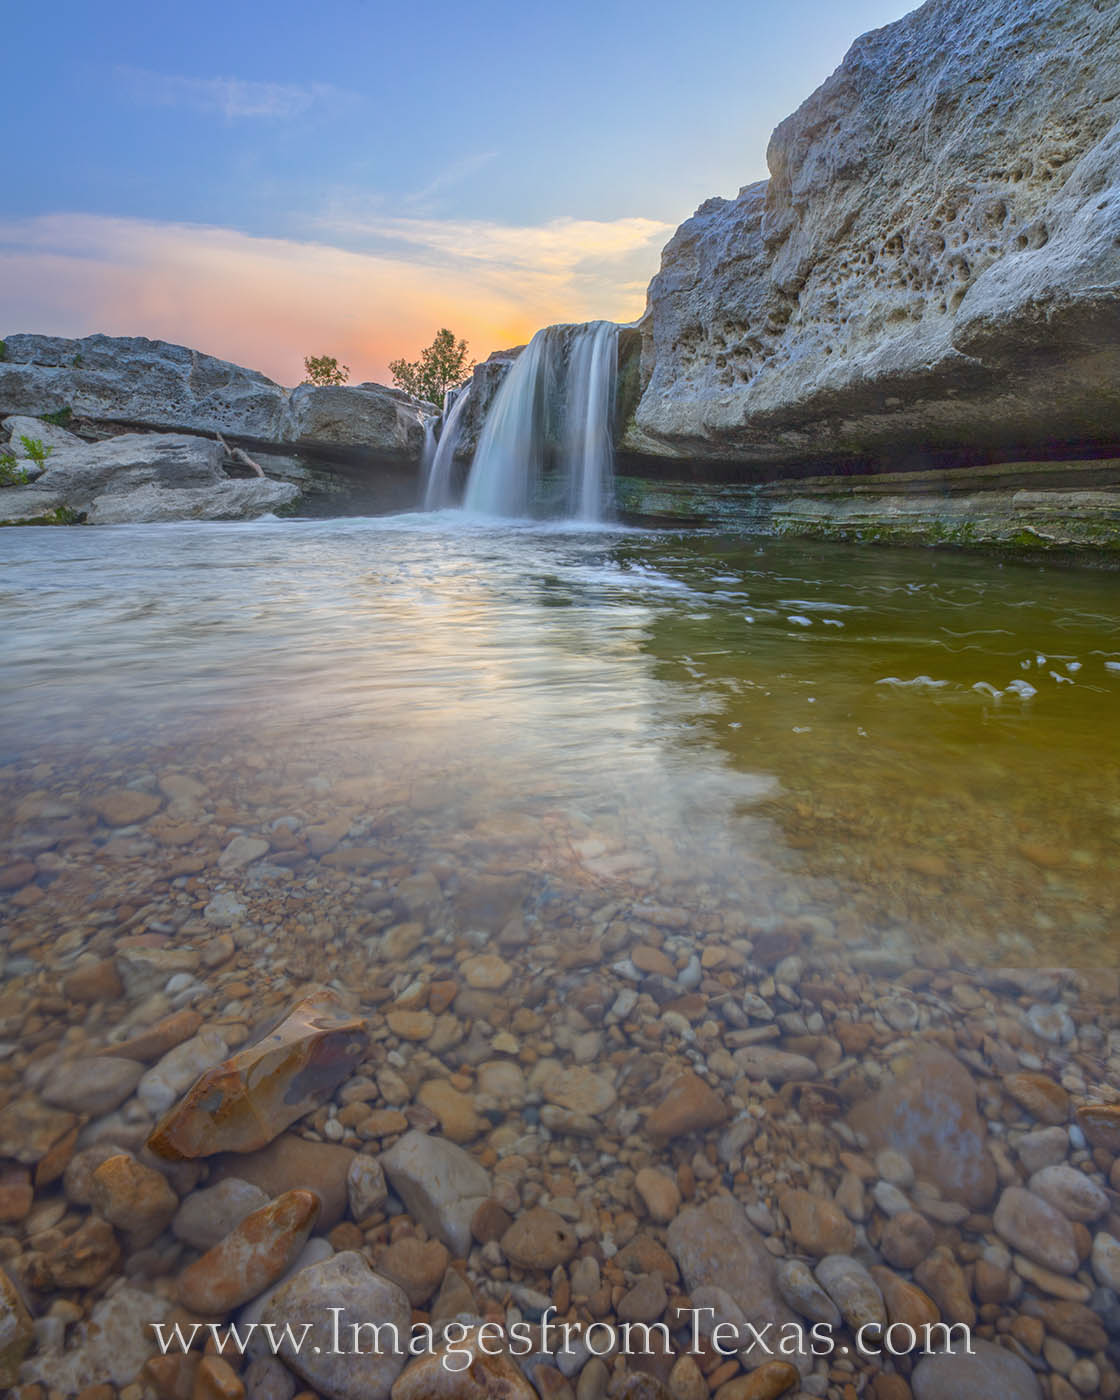 The clear water from Onion Creek pours over the small cascade of Lower Falls in McKinney Falls State Park. This nature sanctuary...